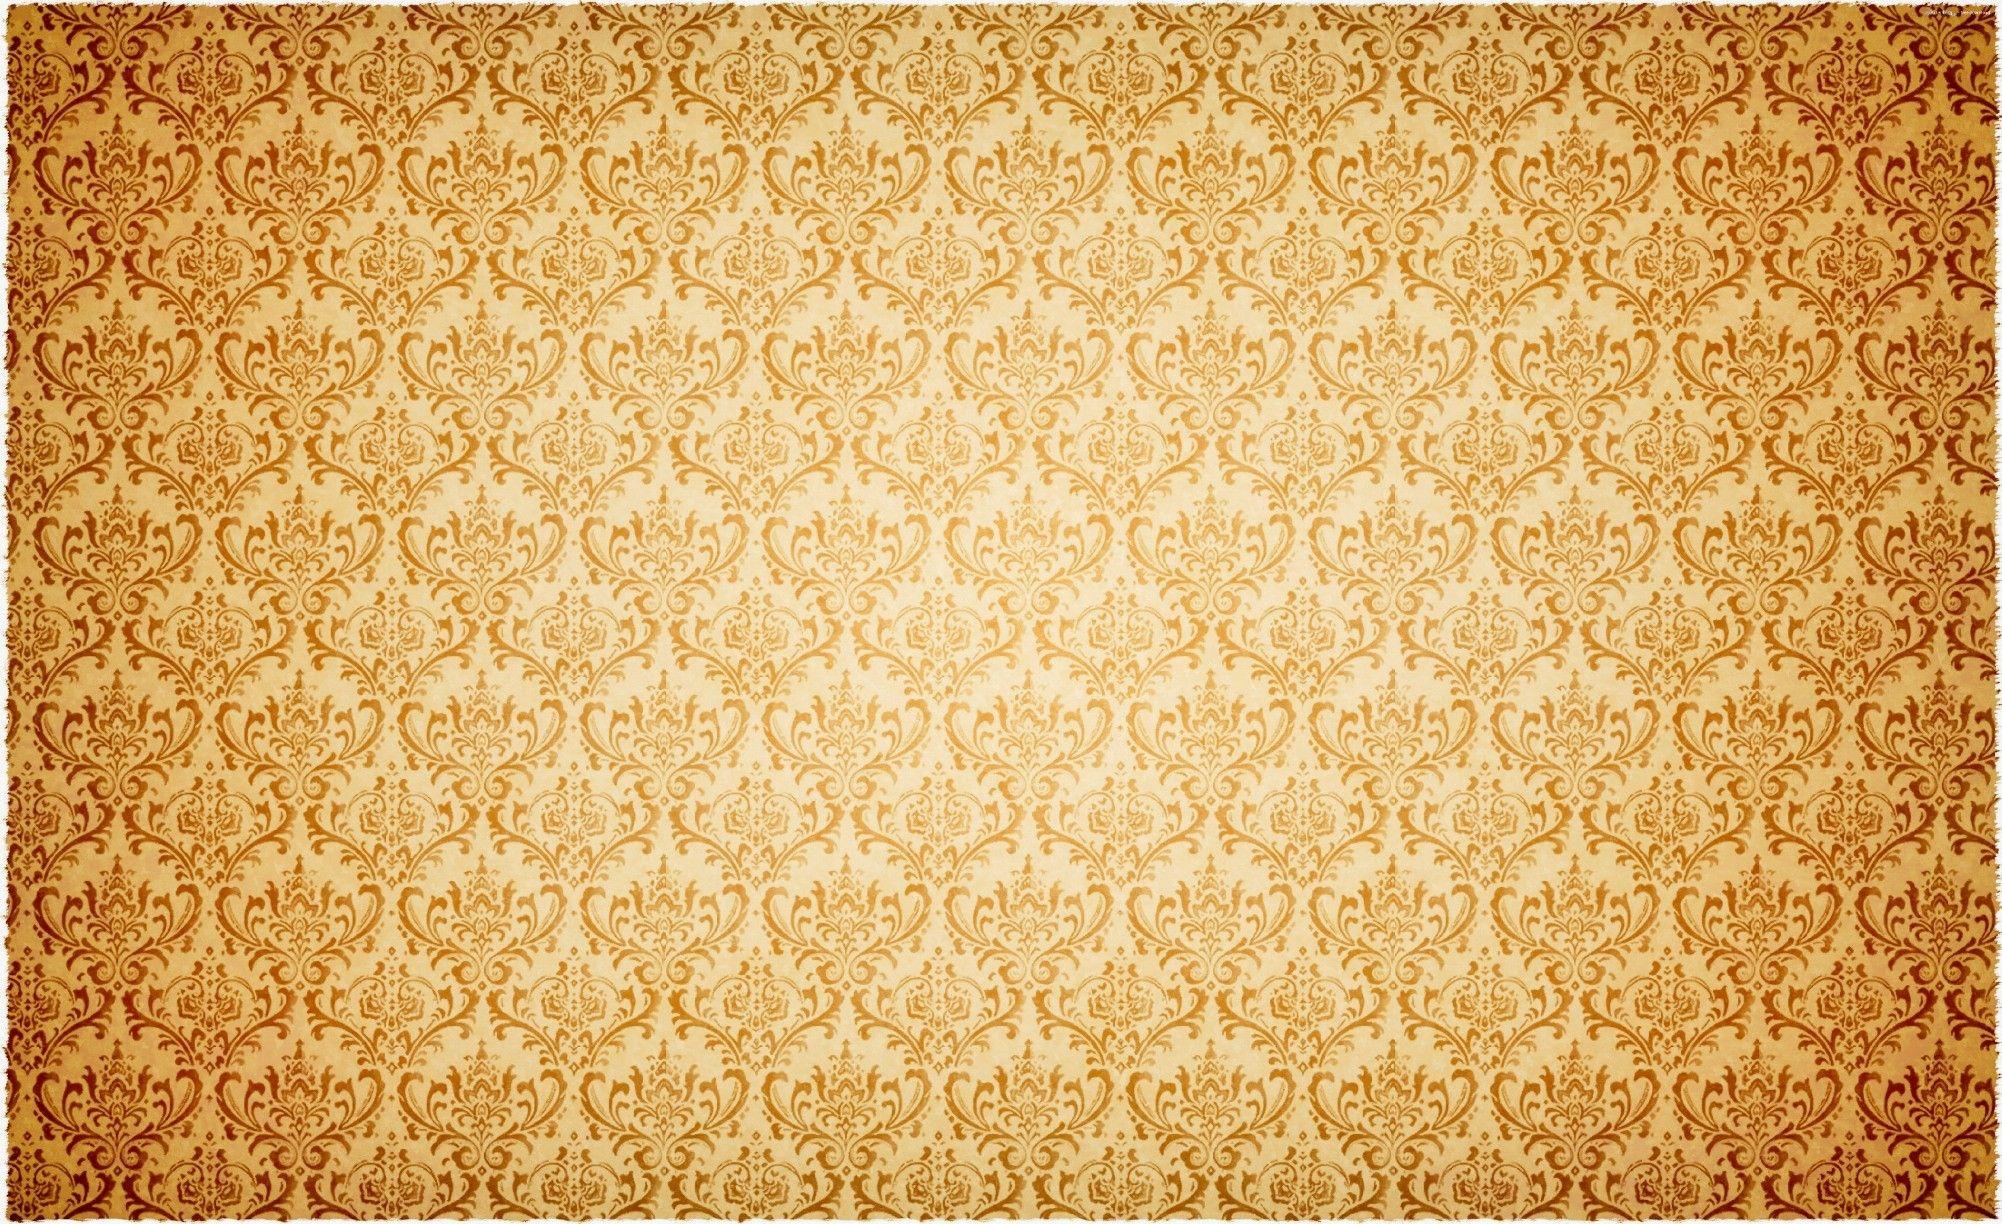 background gold vintage HD 5. Background Check All